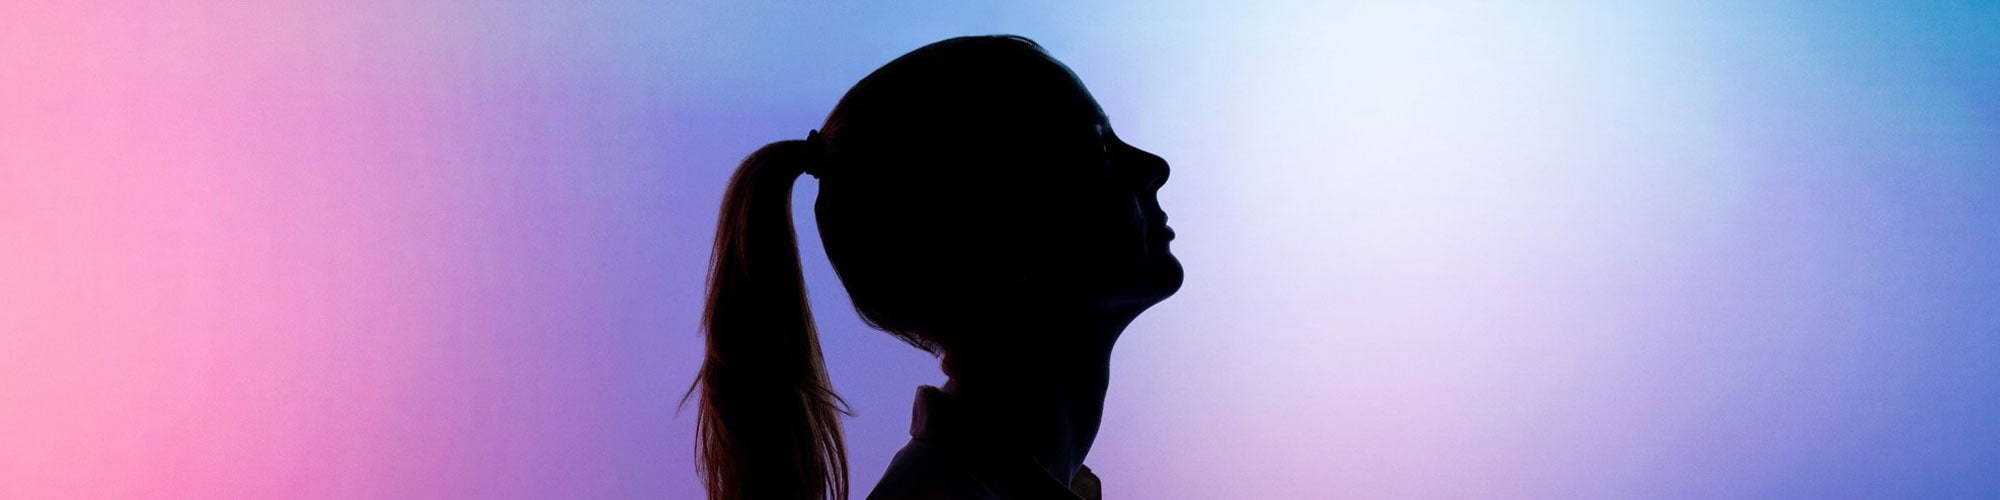 Silhouette of woman's head looking up 